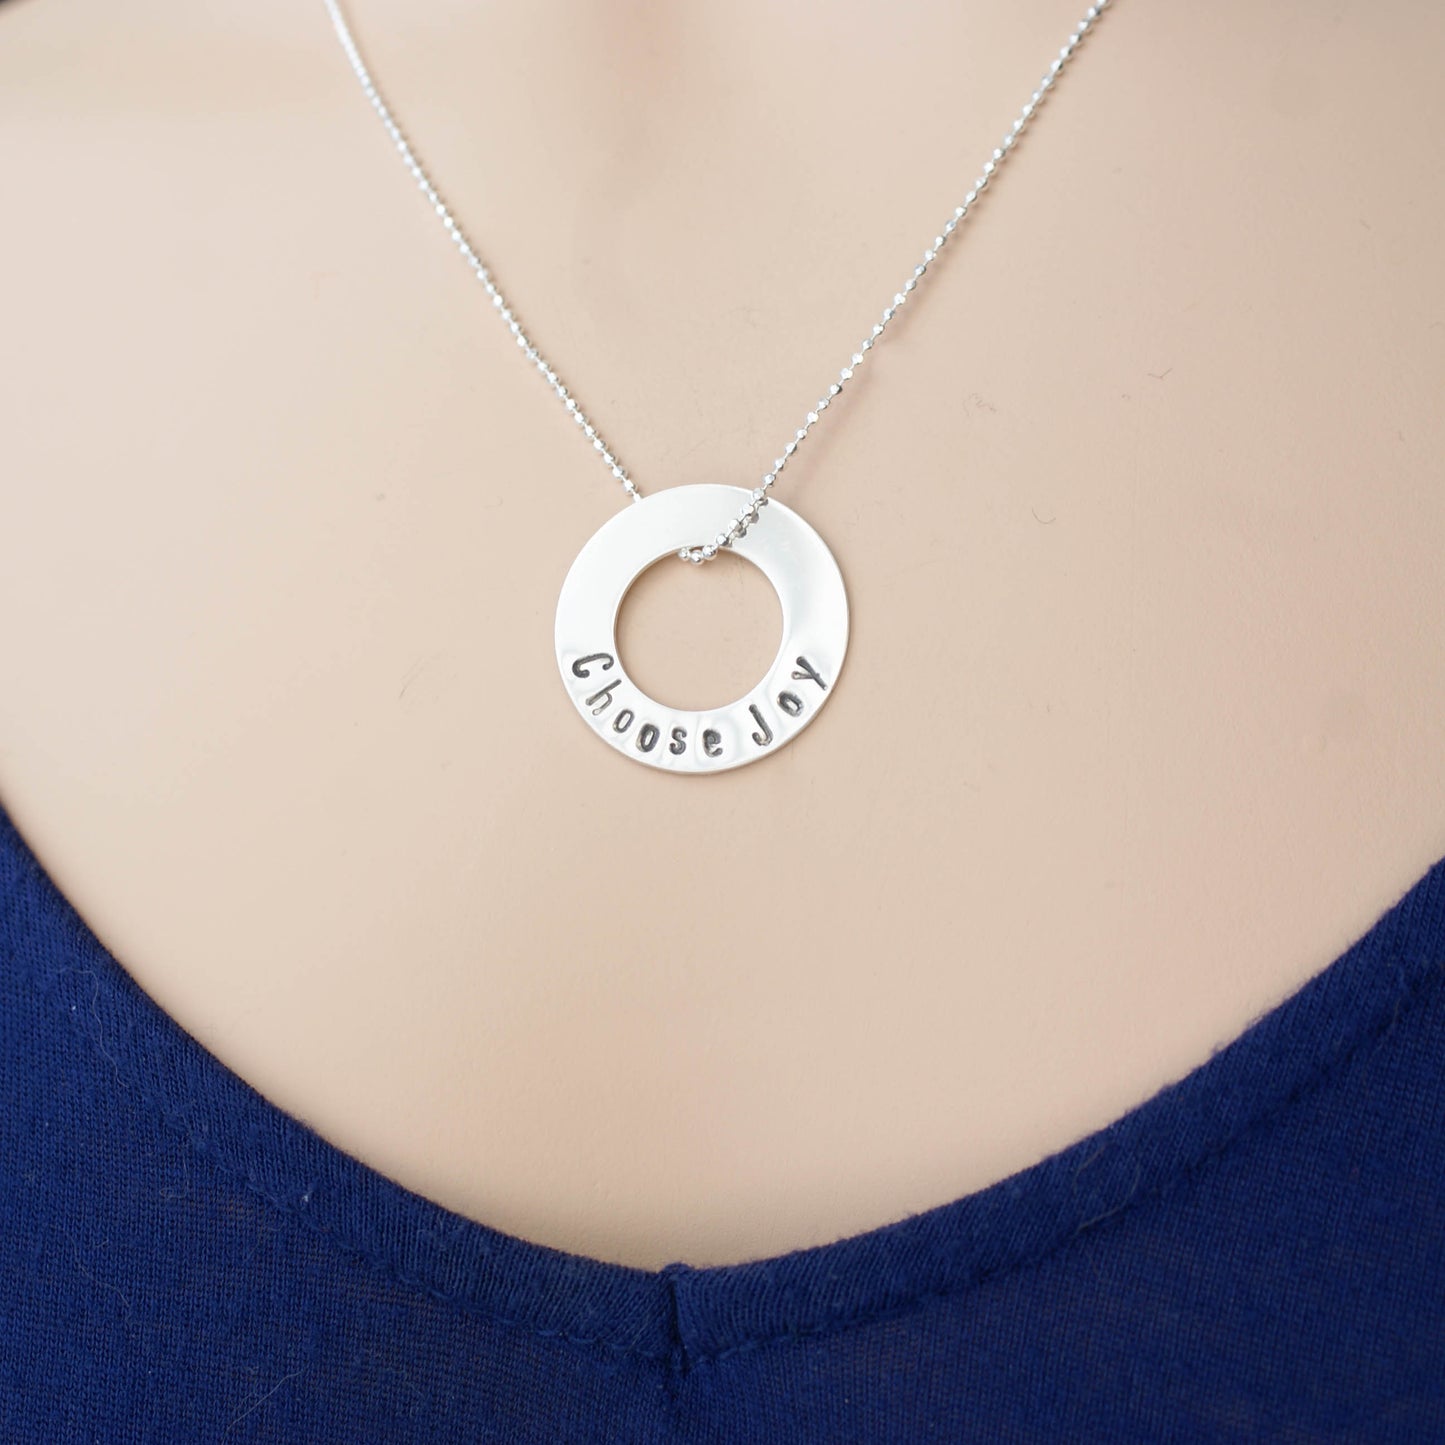 Choose Joy Circle Necklace in Sterling Silver on neck